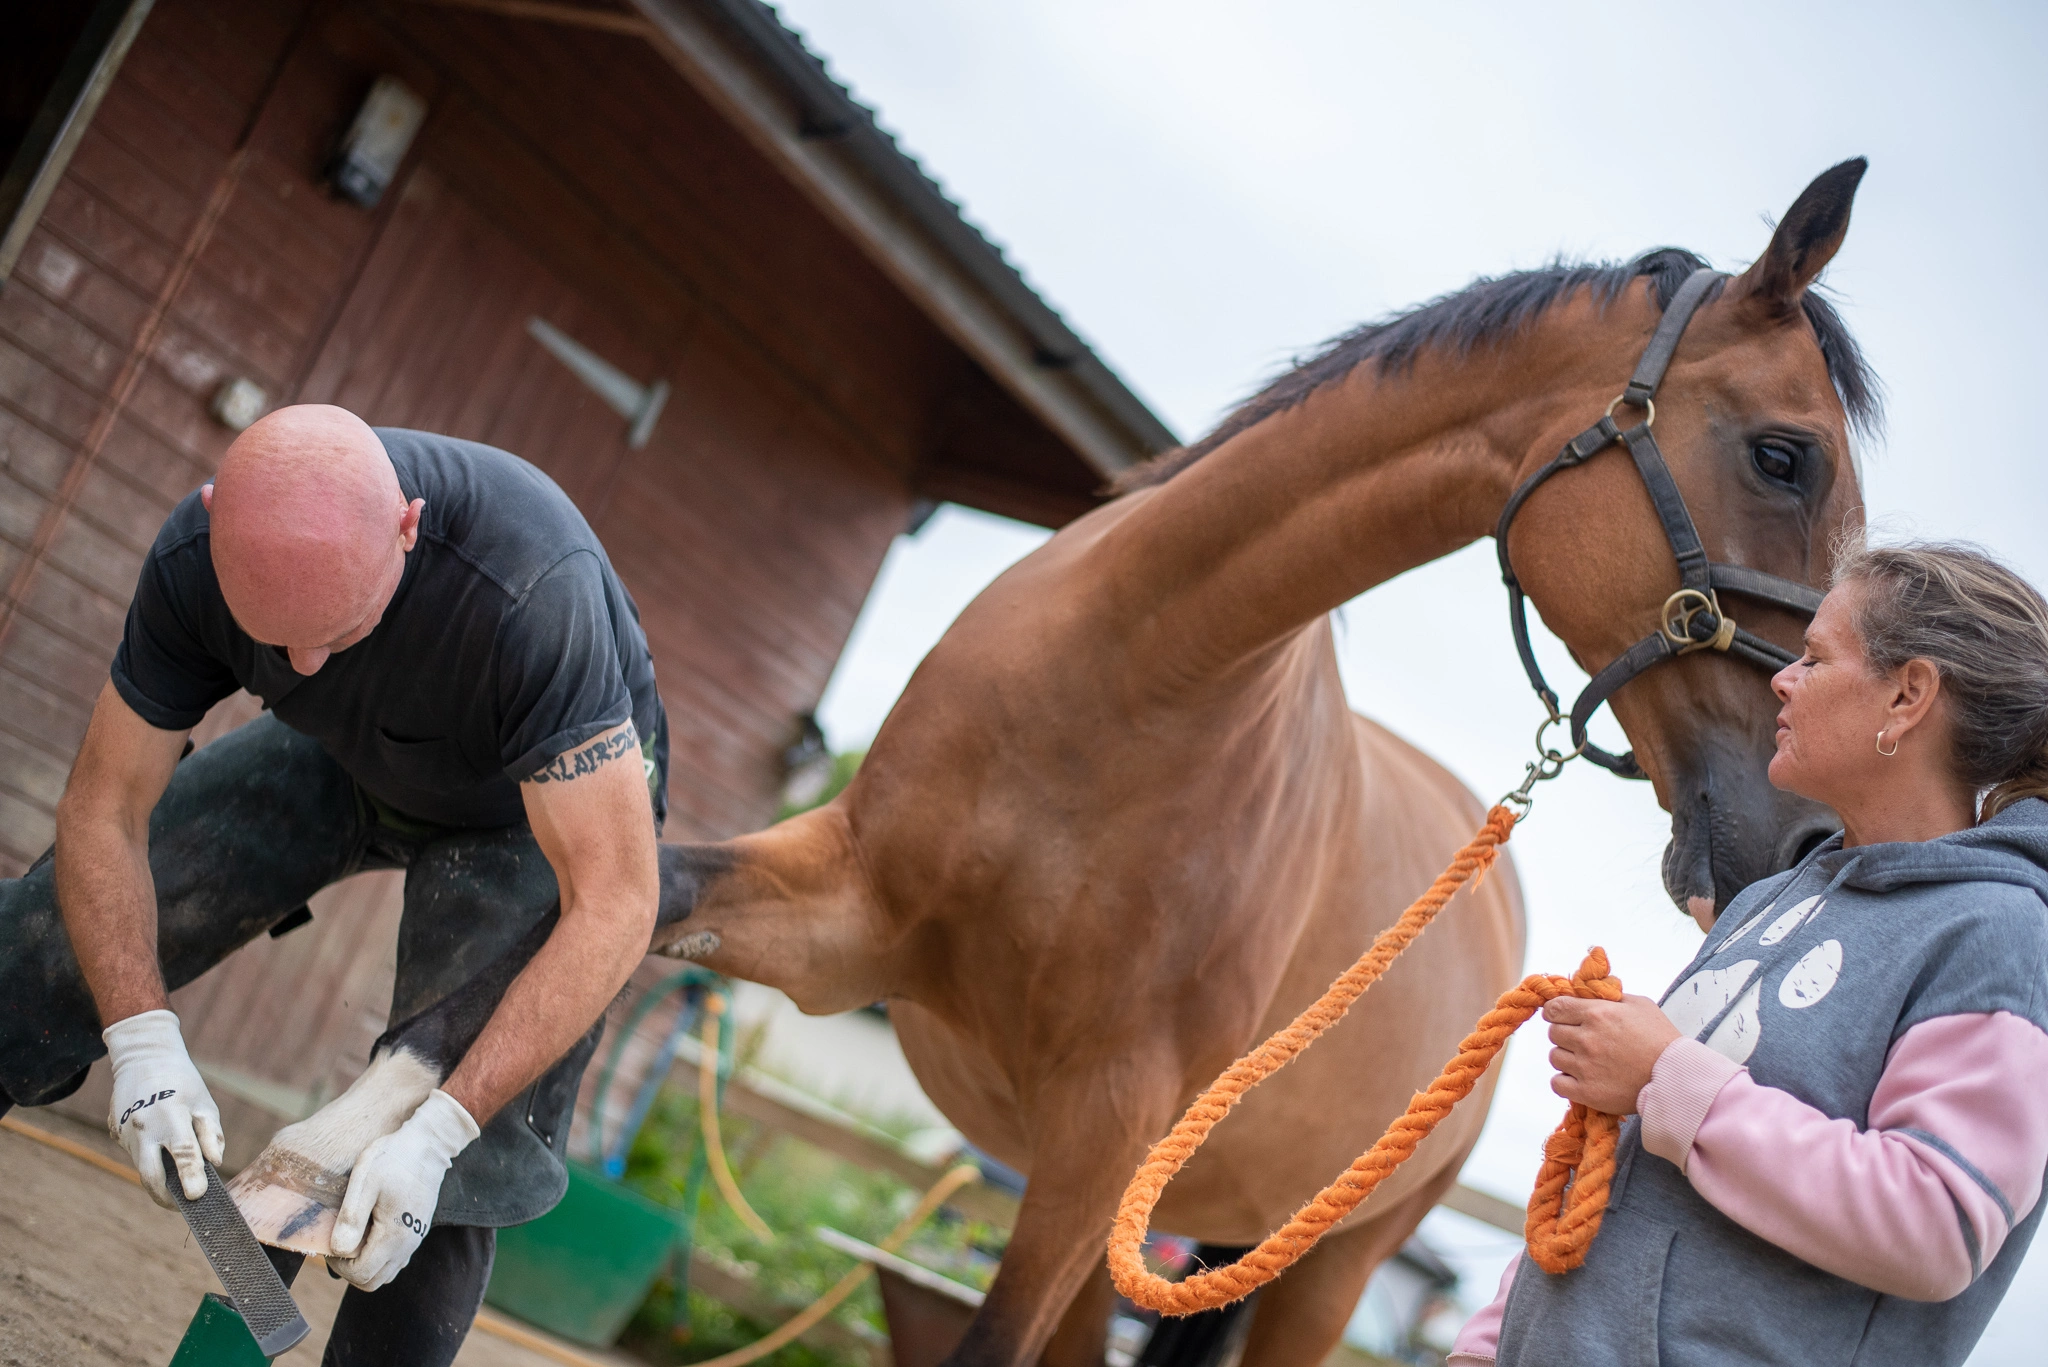 Relaxed horse getting its barefoot hooves trimmed